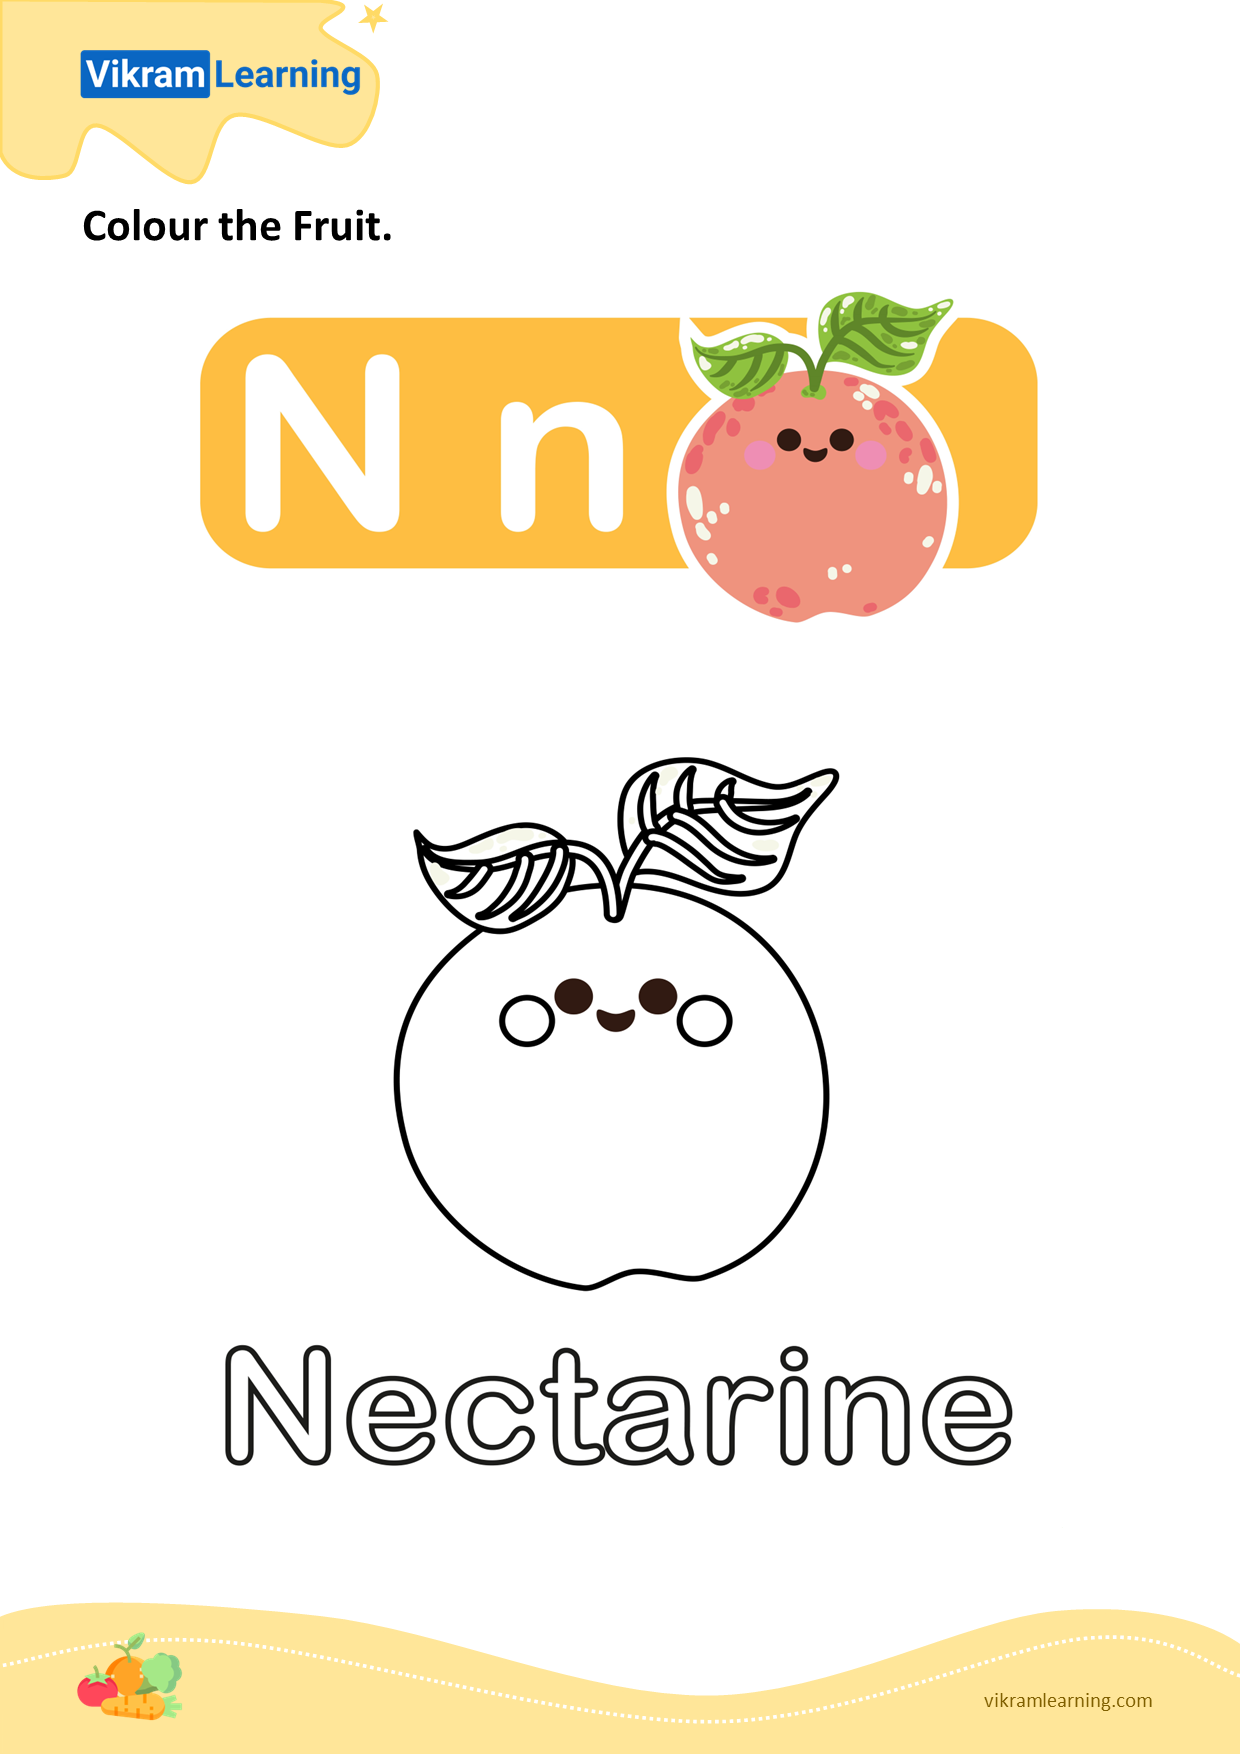 Download colour the fruit - nectarine worksheets